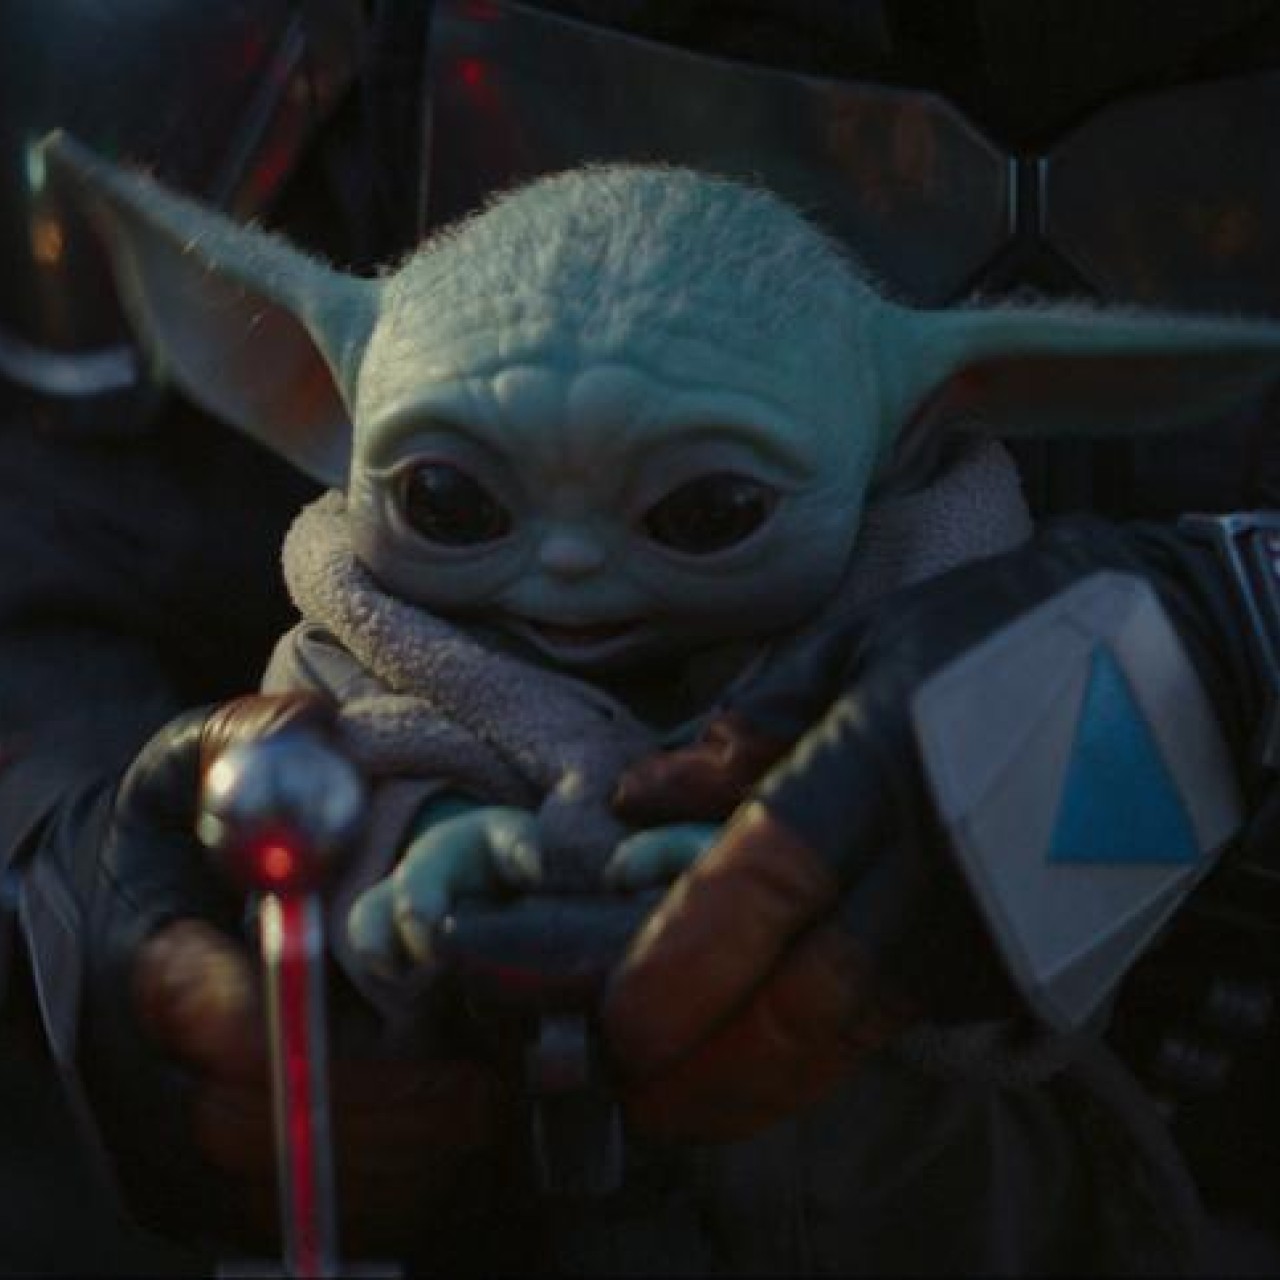 More Yoda to come as Disney 'Star Wars' content - YP | South China Morning Post